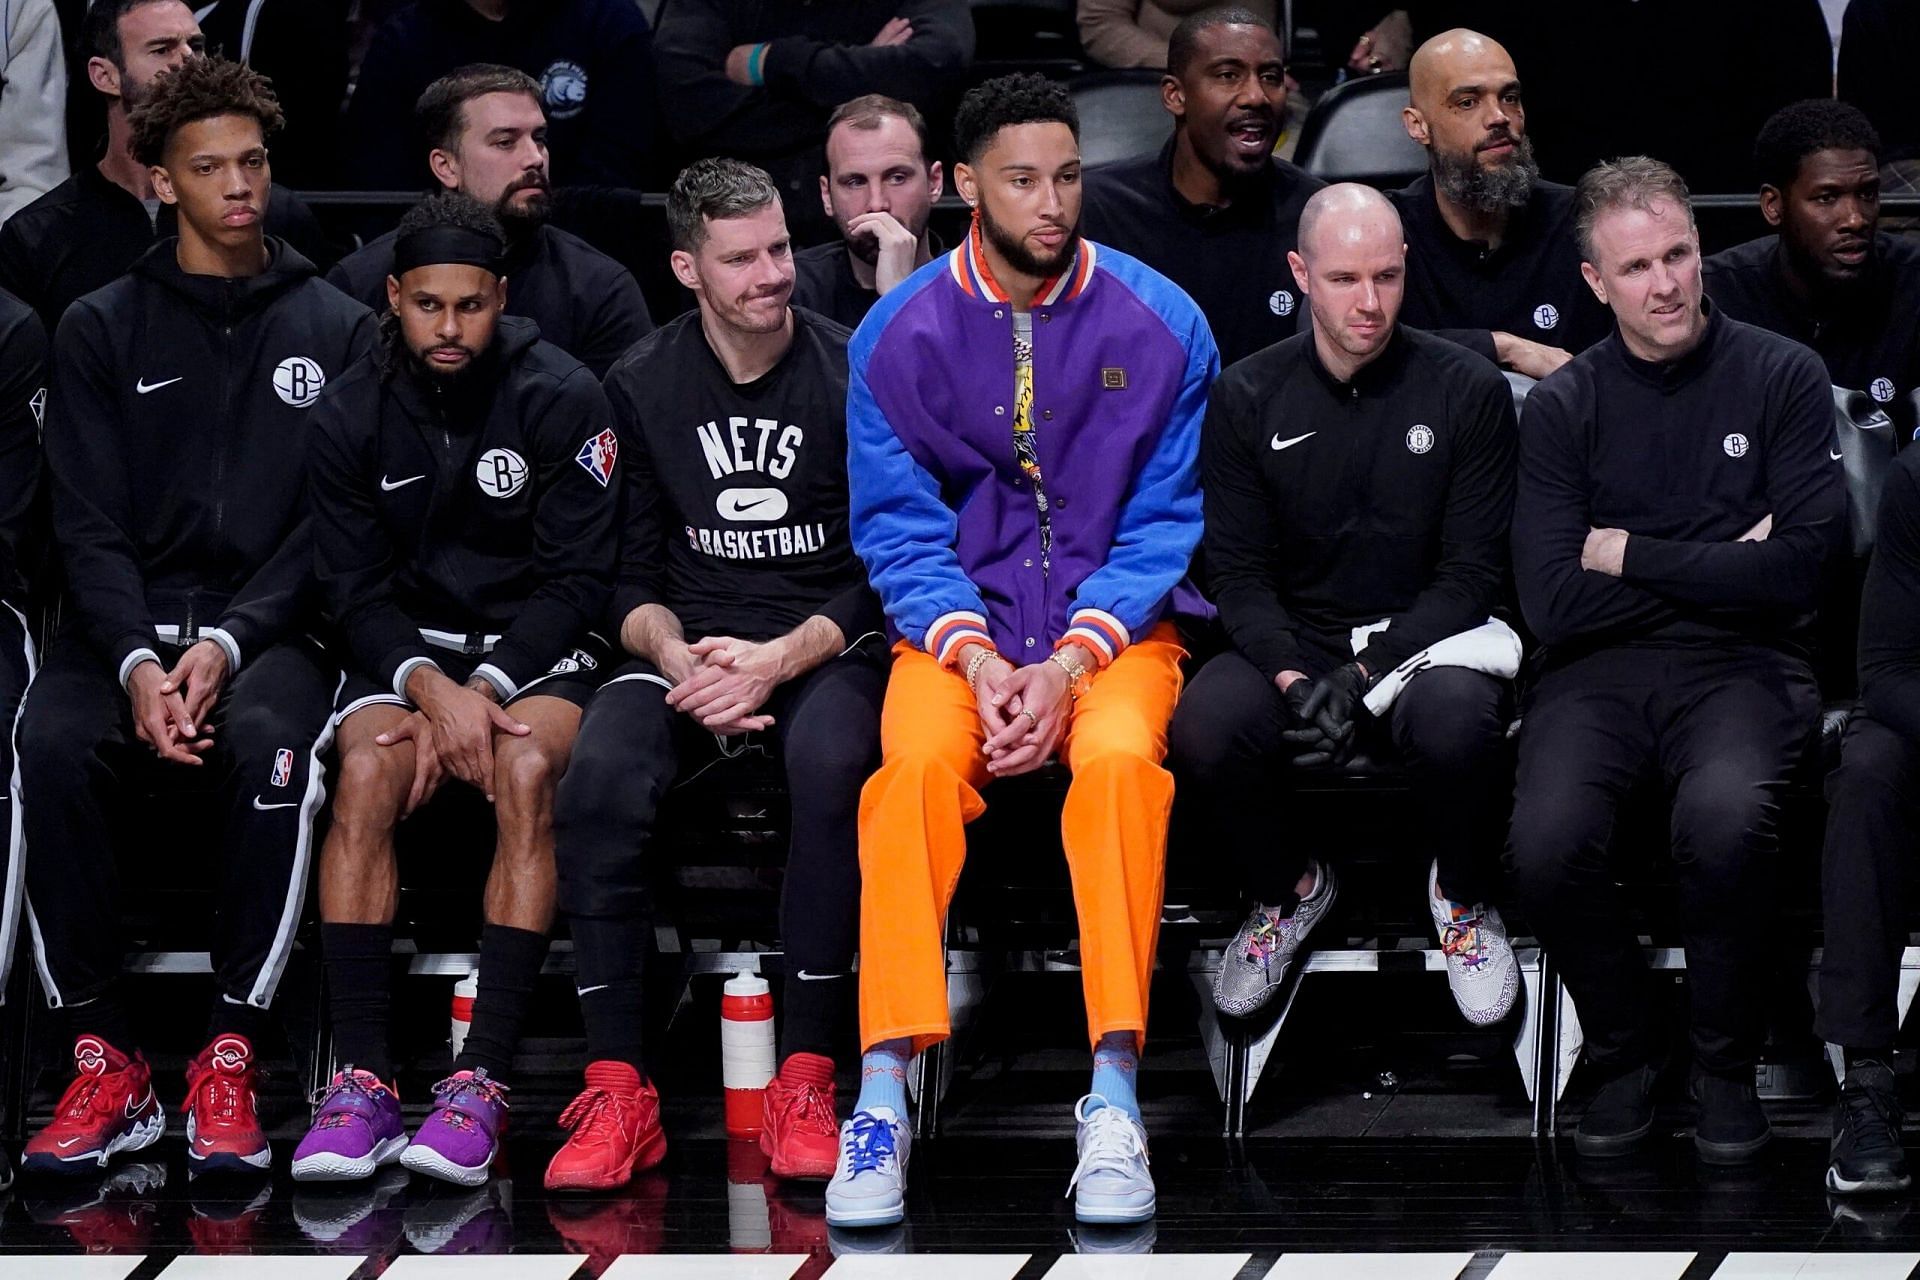 Stephen A. Smith continues with his rant against the Brooklyn Nets&#039; superstar point guard. [Photo: Boston.com]